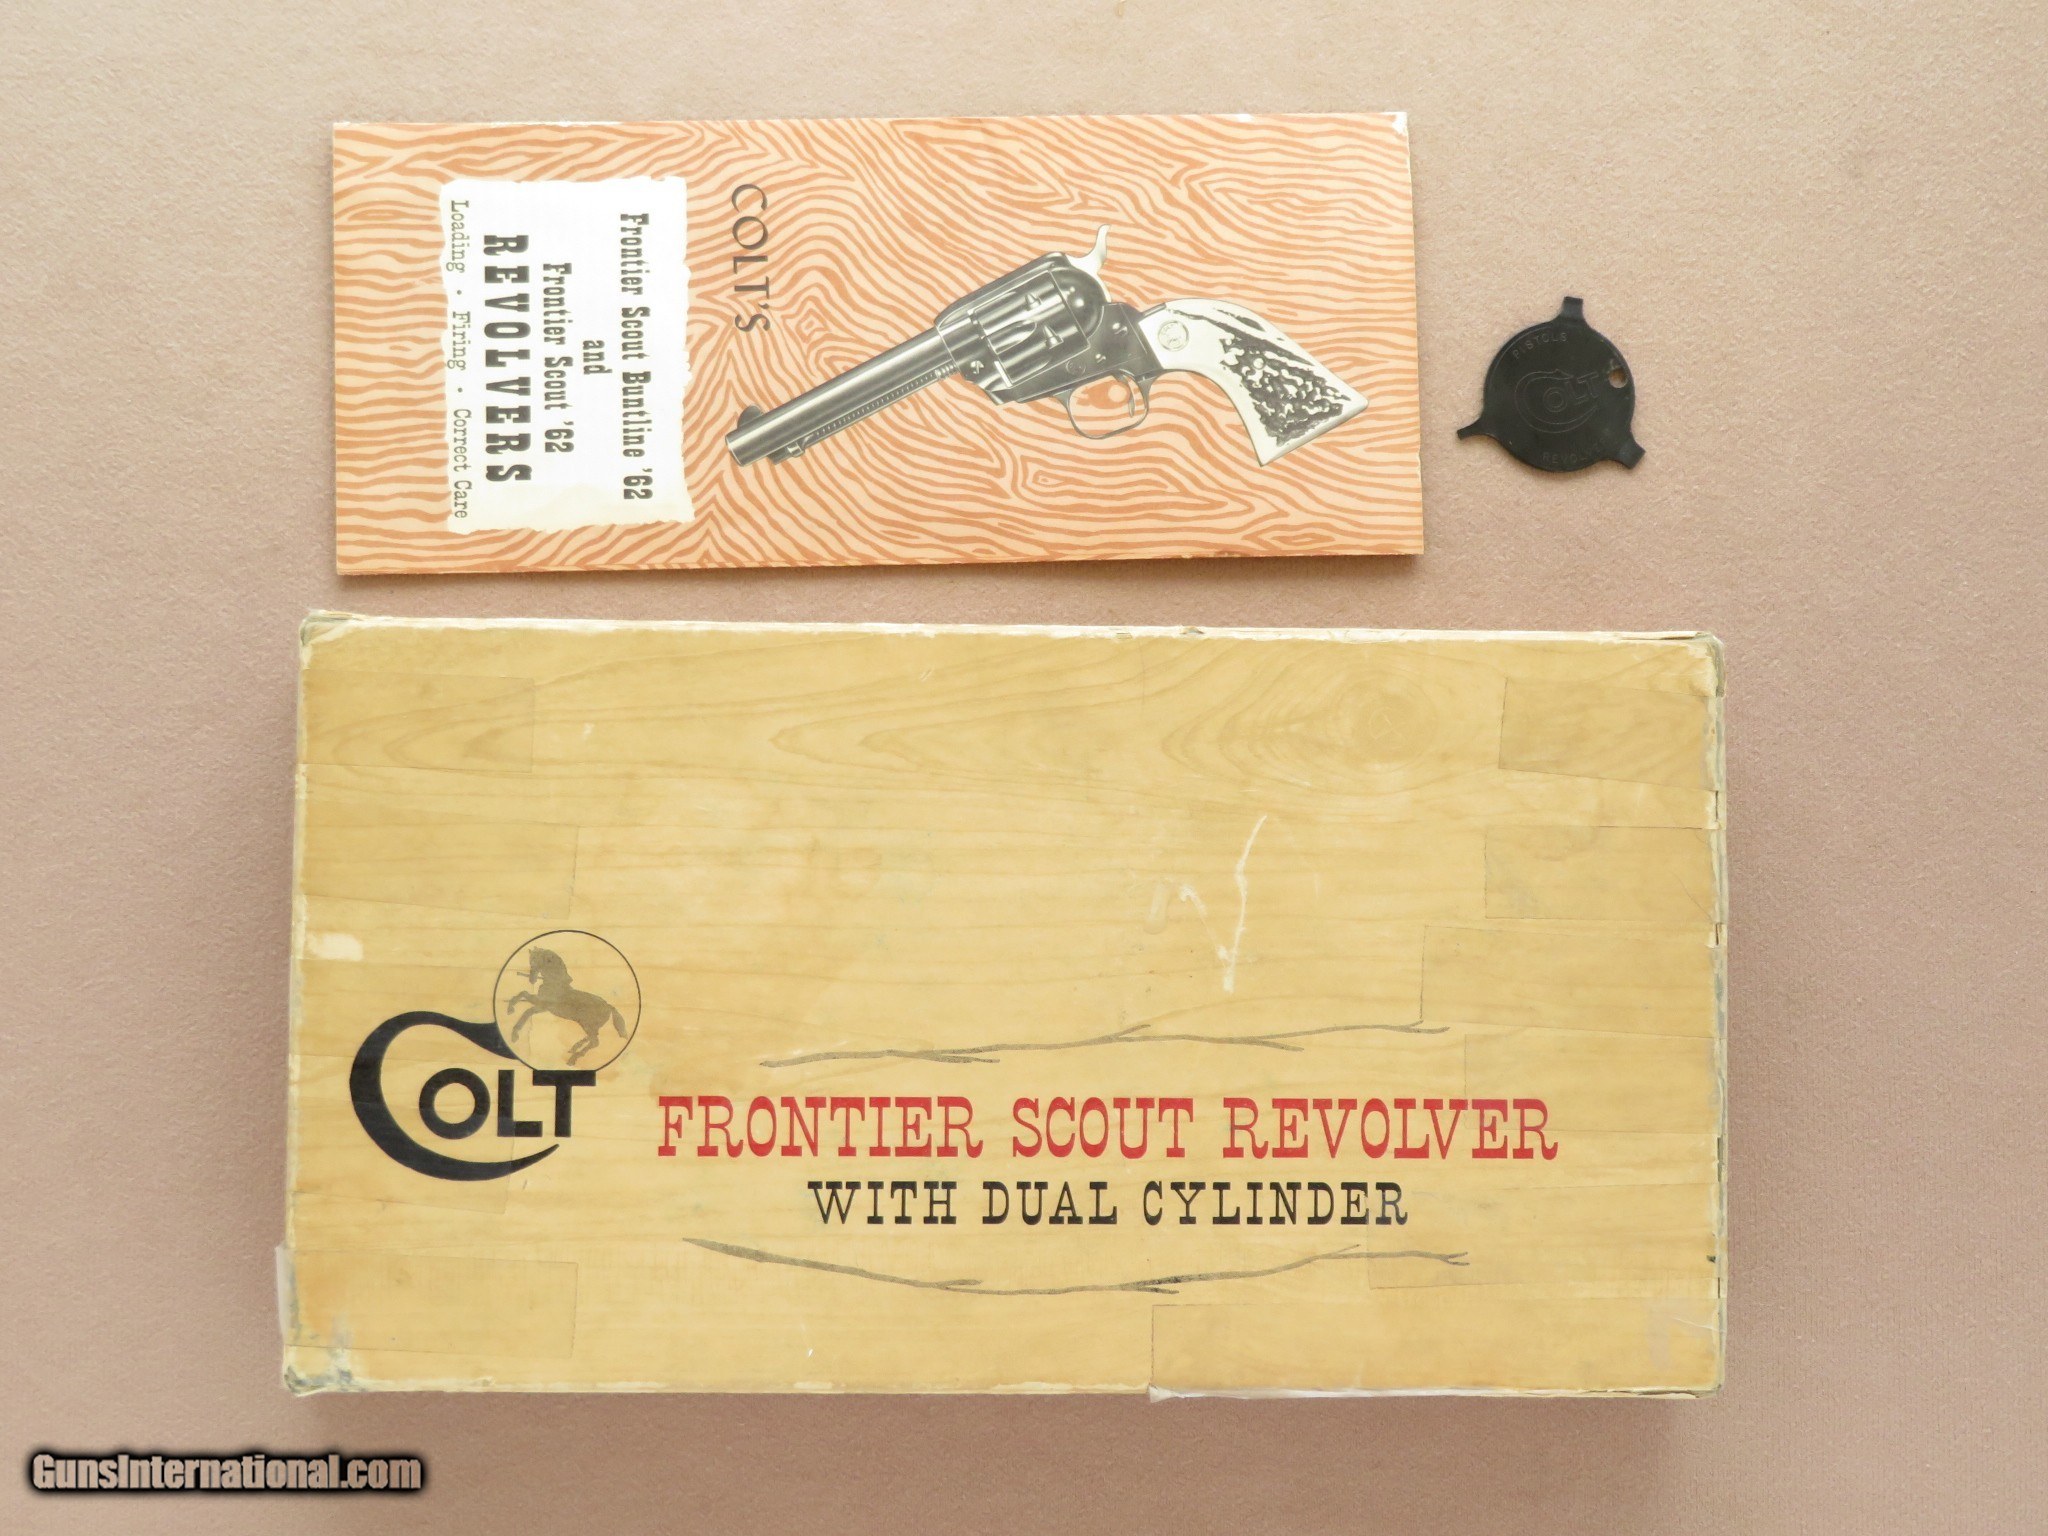 Colt Frontier Scout 62, Cal. .22 LR & .22 Magnum Cylinders, 4 3/4 Inch ...